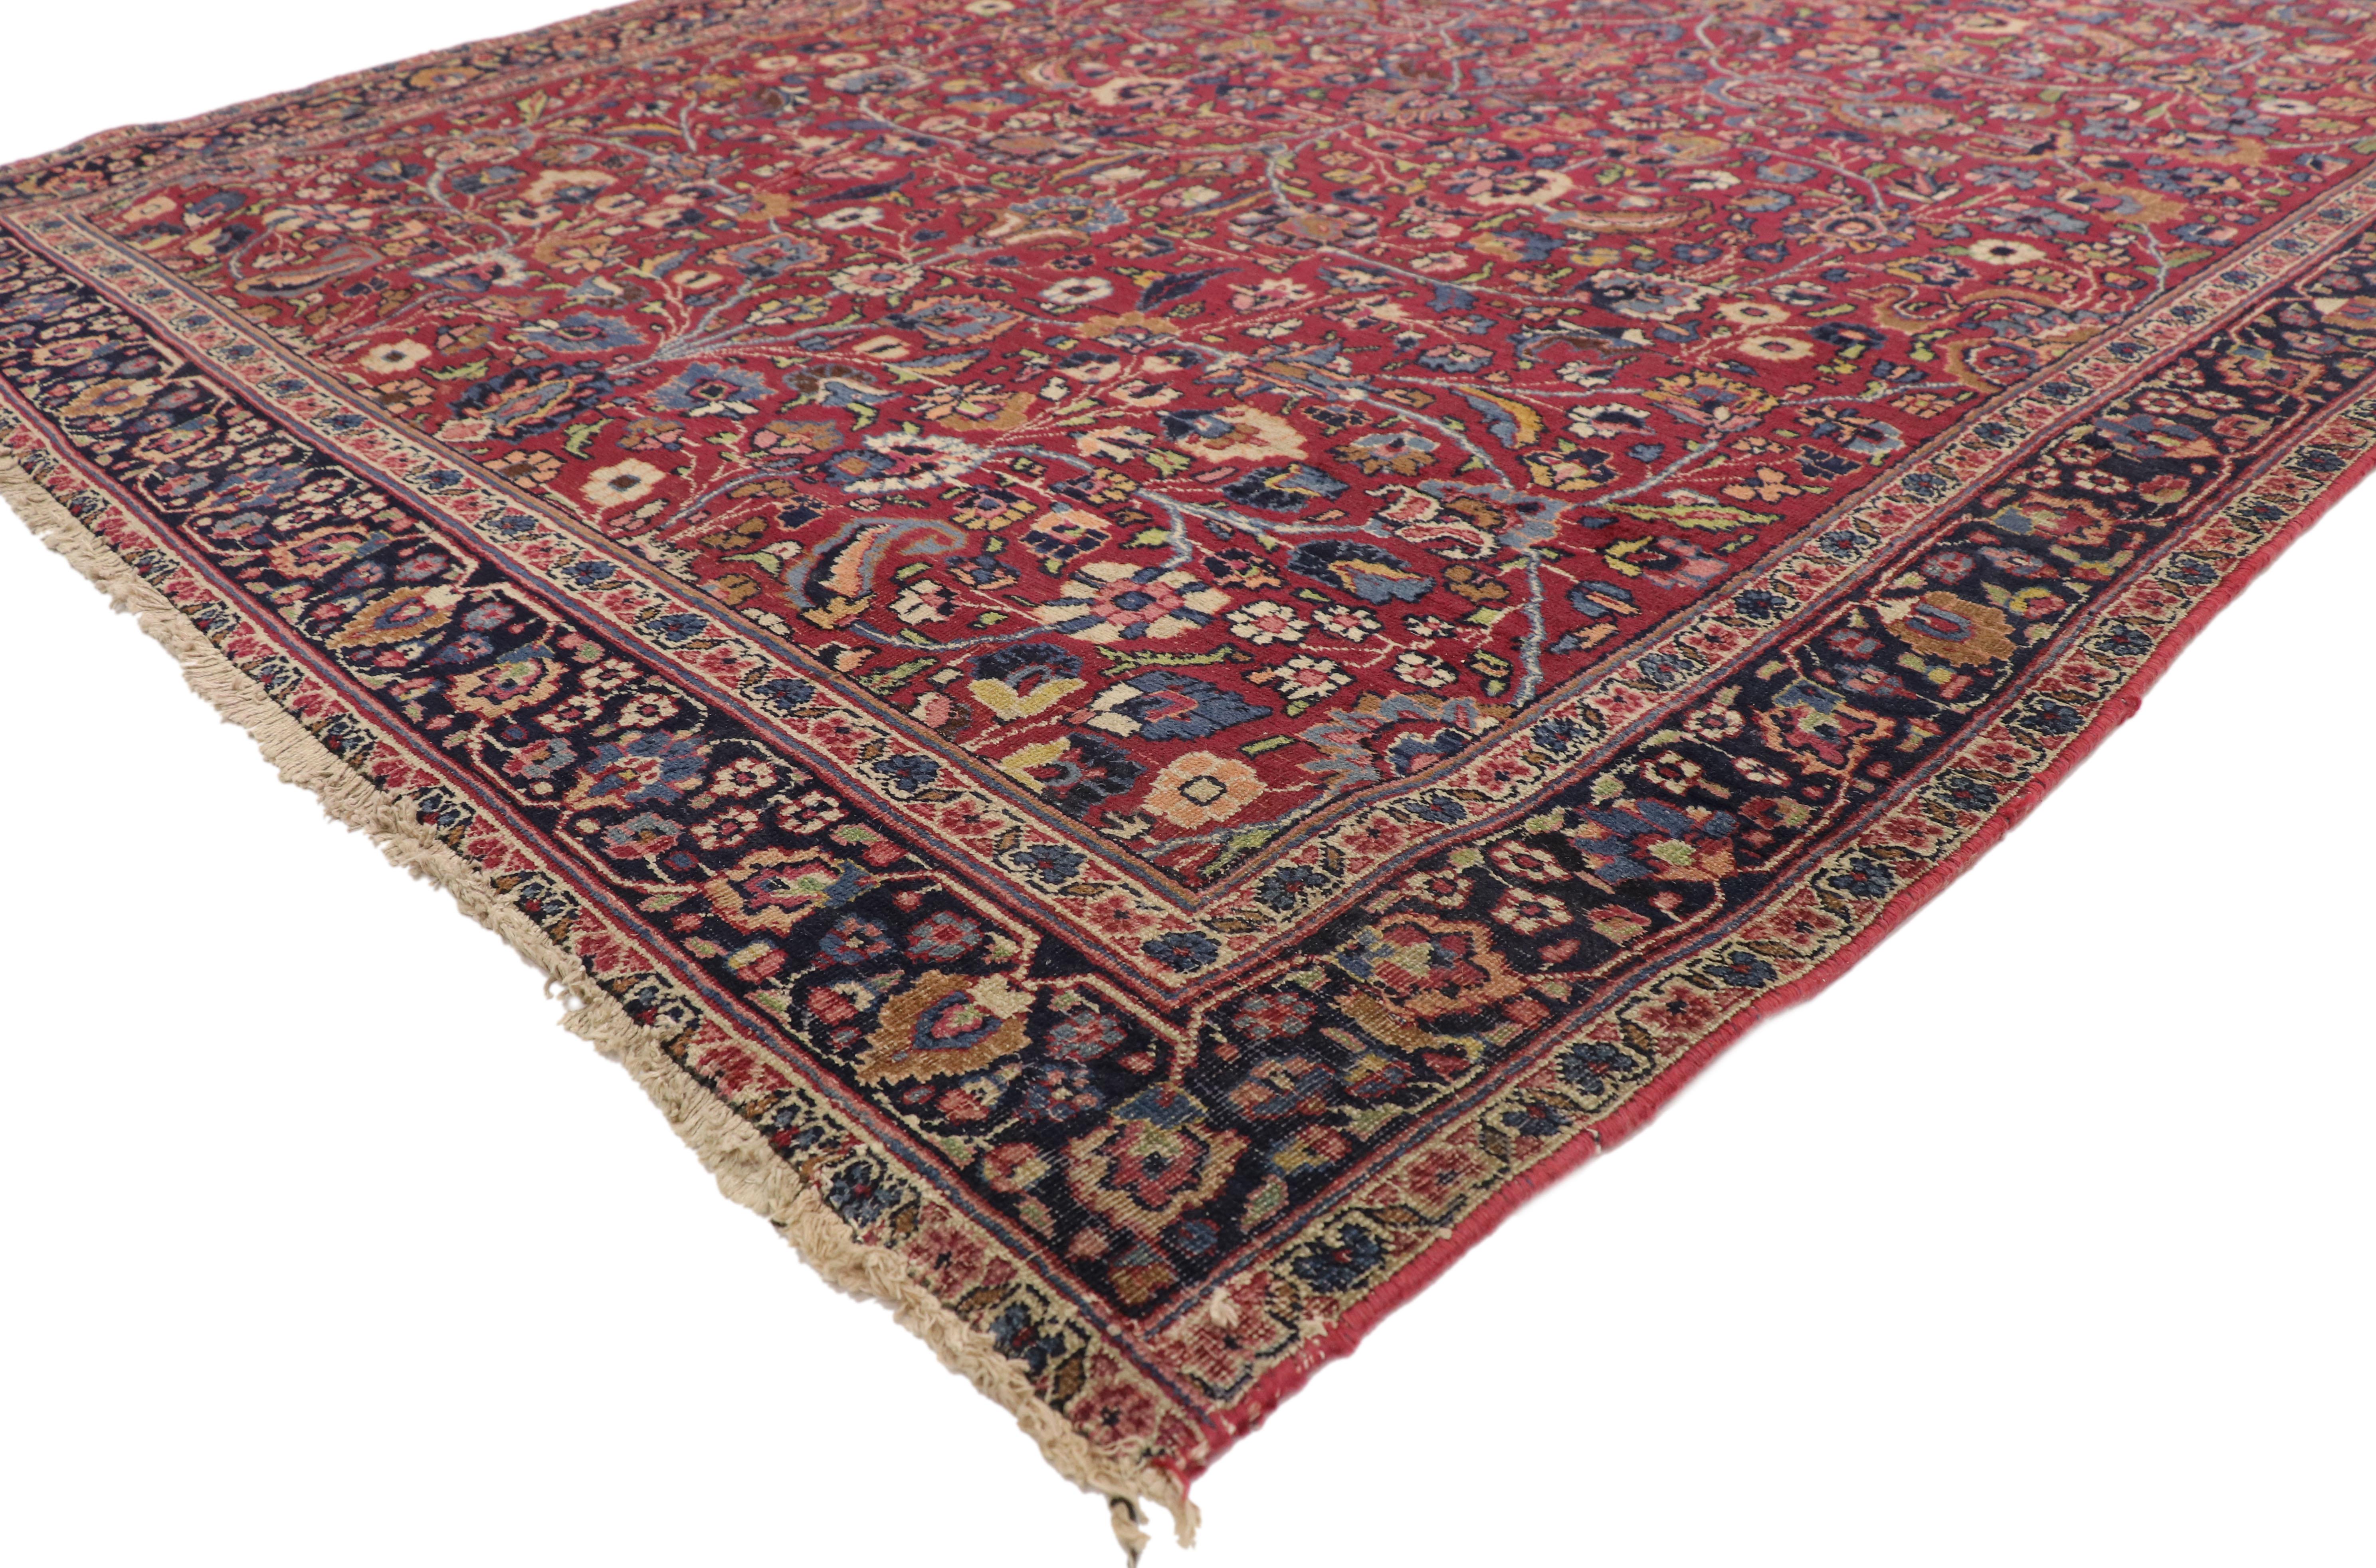 Victorian Antique Persian Mashhad Runner with Old World Style, Extra Long Hallway Runner For Sale